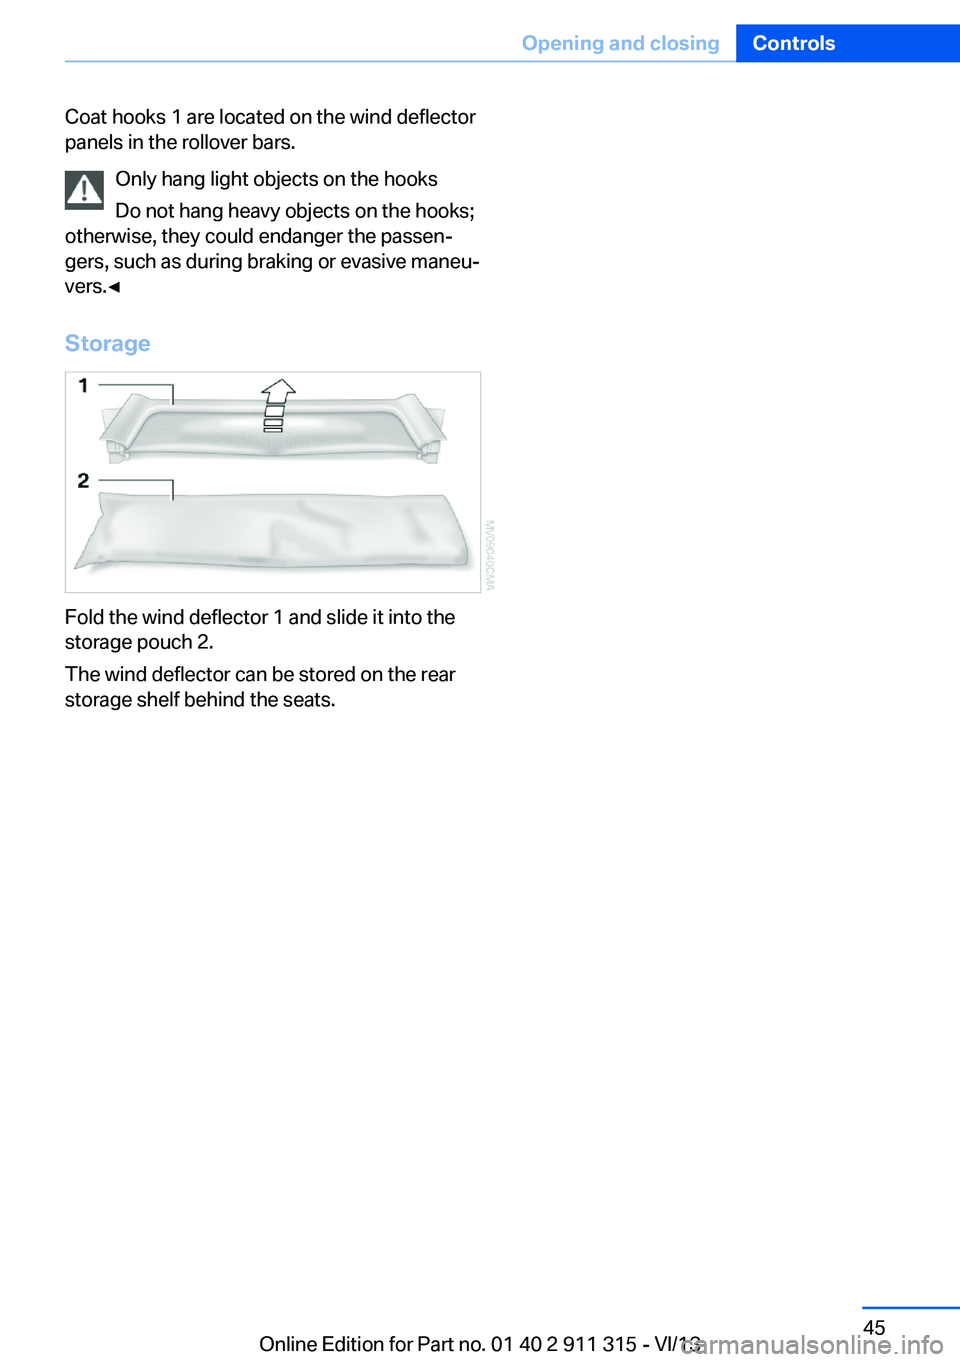 BMW Z4 SDRIVE35I 2014 Service Manual Coat hooks 1 are located on the wind deflector
panels in the rollover bars.
Only hang light objects on the hooks
Do not hang heavy objects on the hooks;
otherwise, they could endanger the passen‐
ge